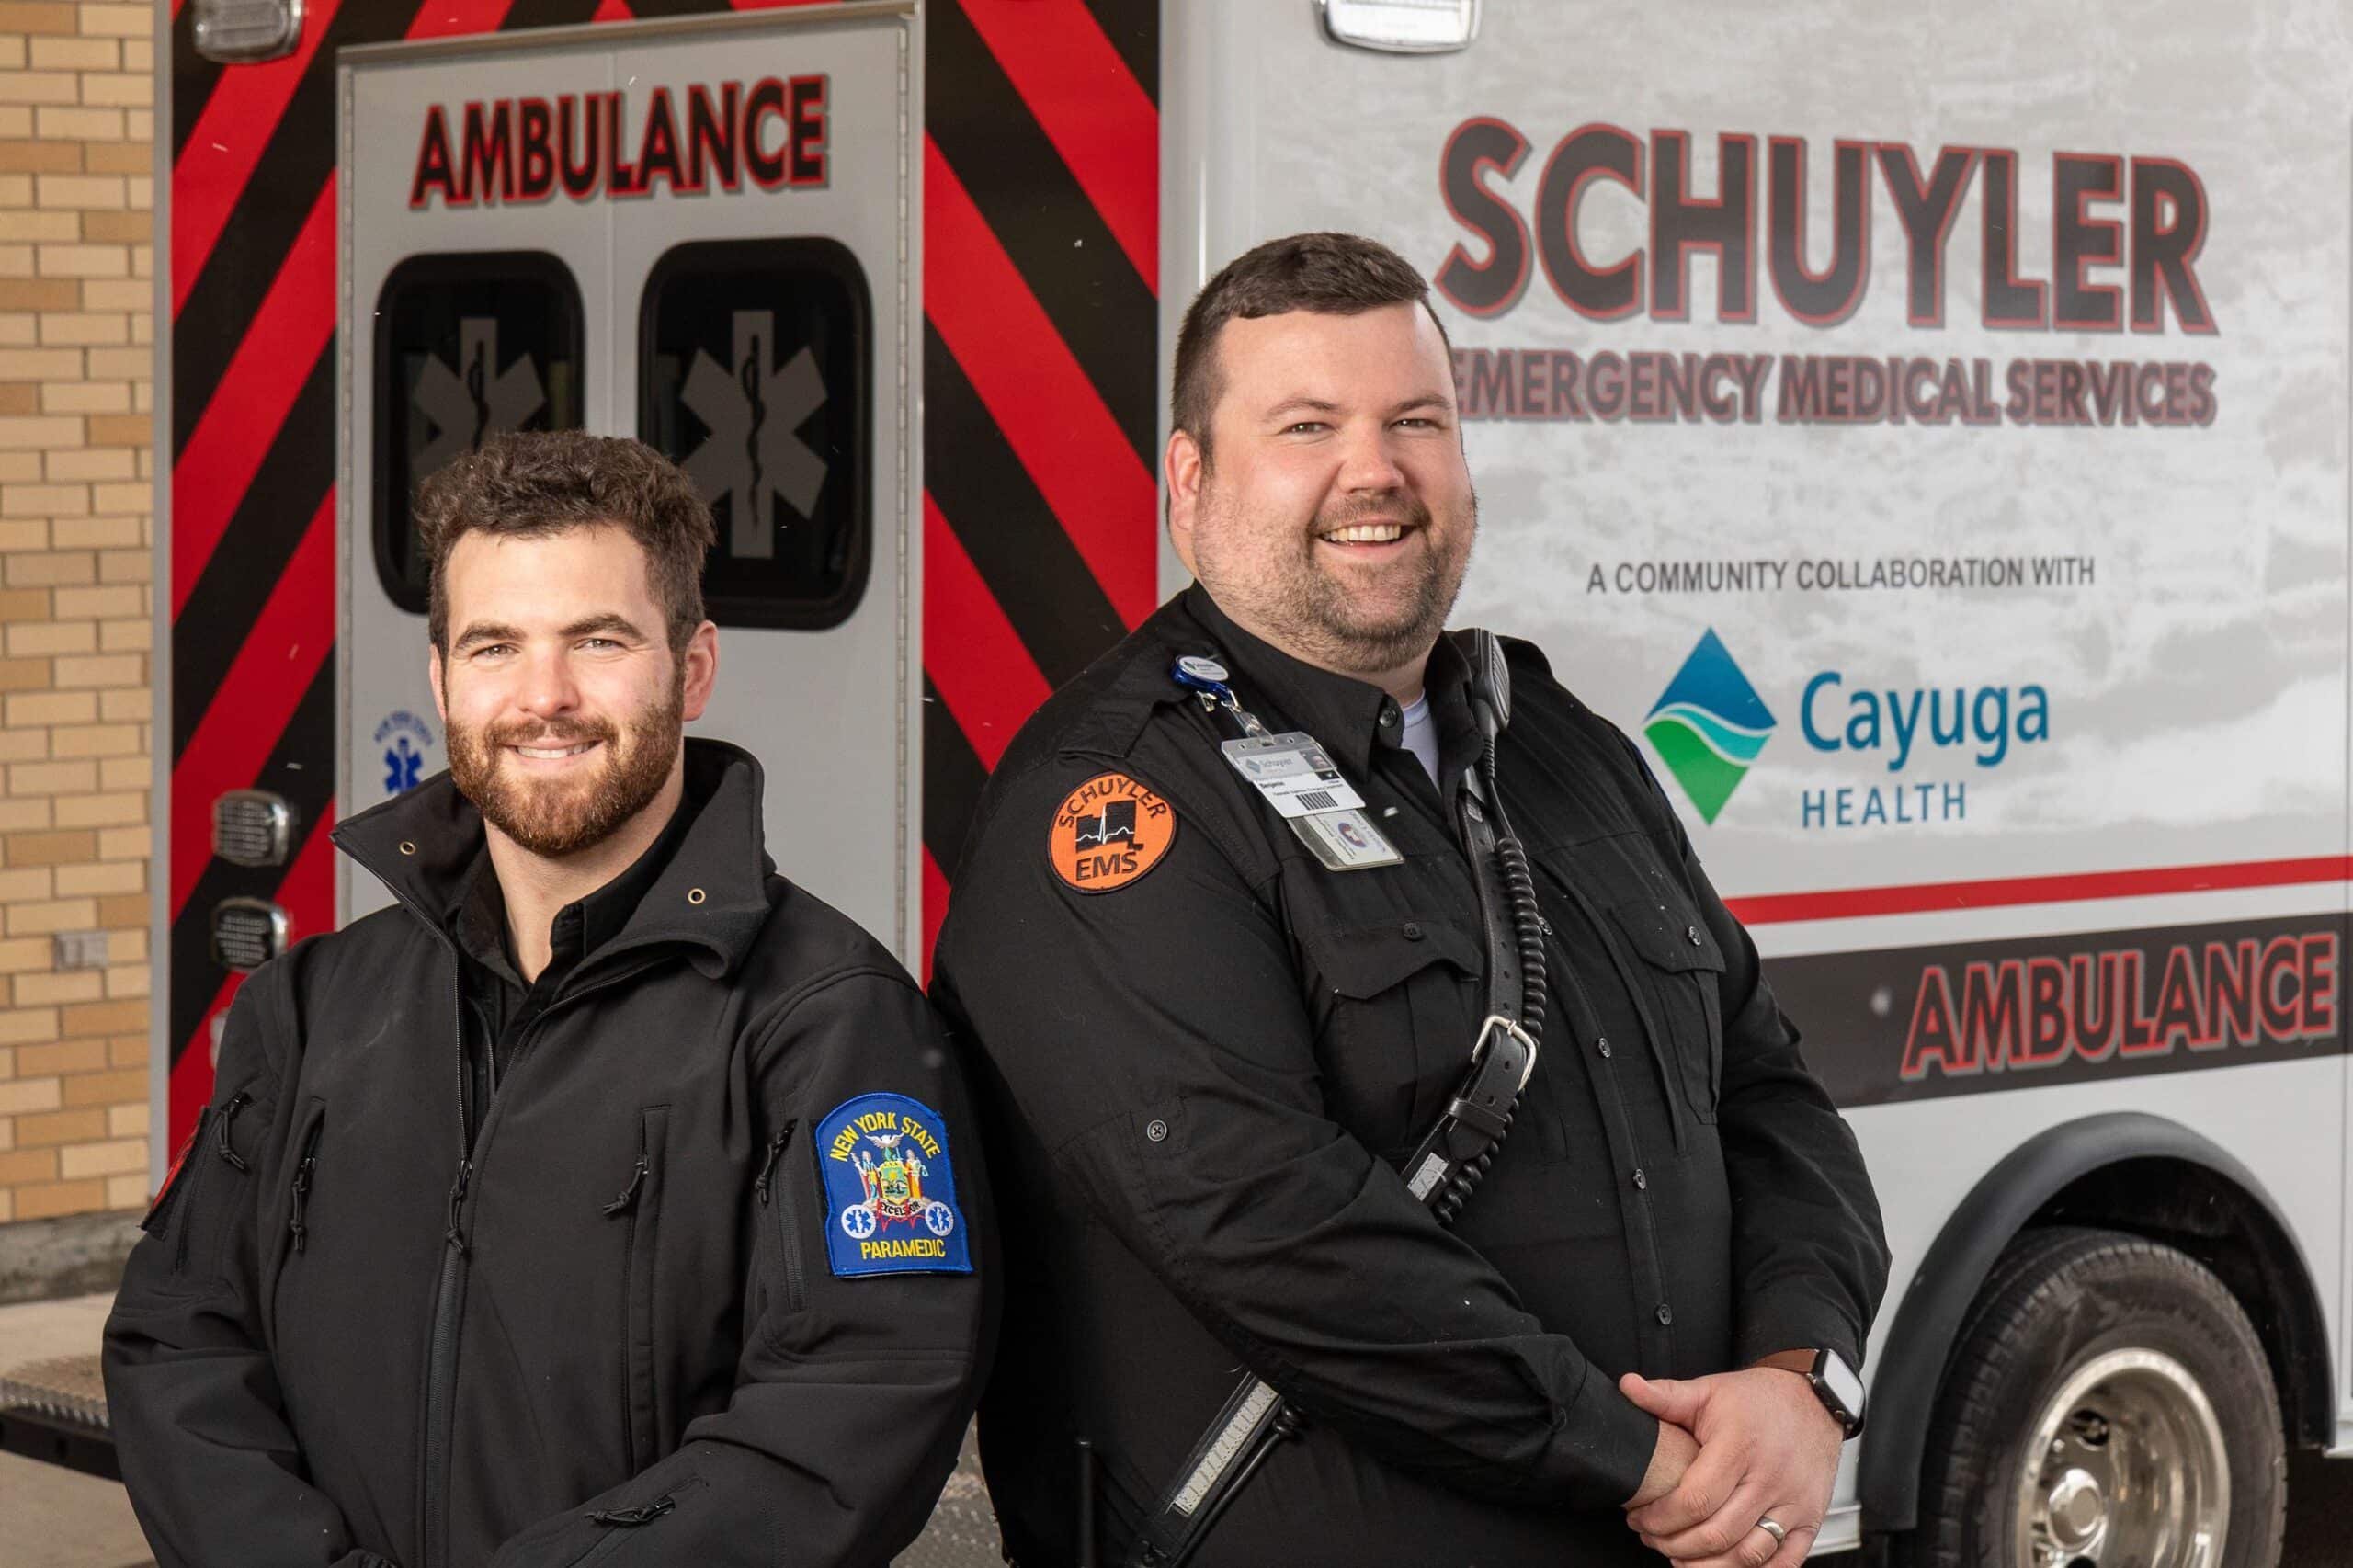 Schuyler County reflects on changing EMS model: What makes service so challenging in rural communities?